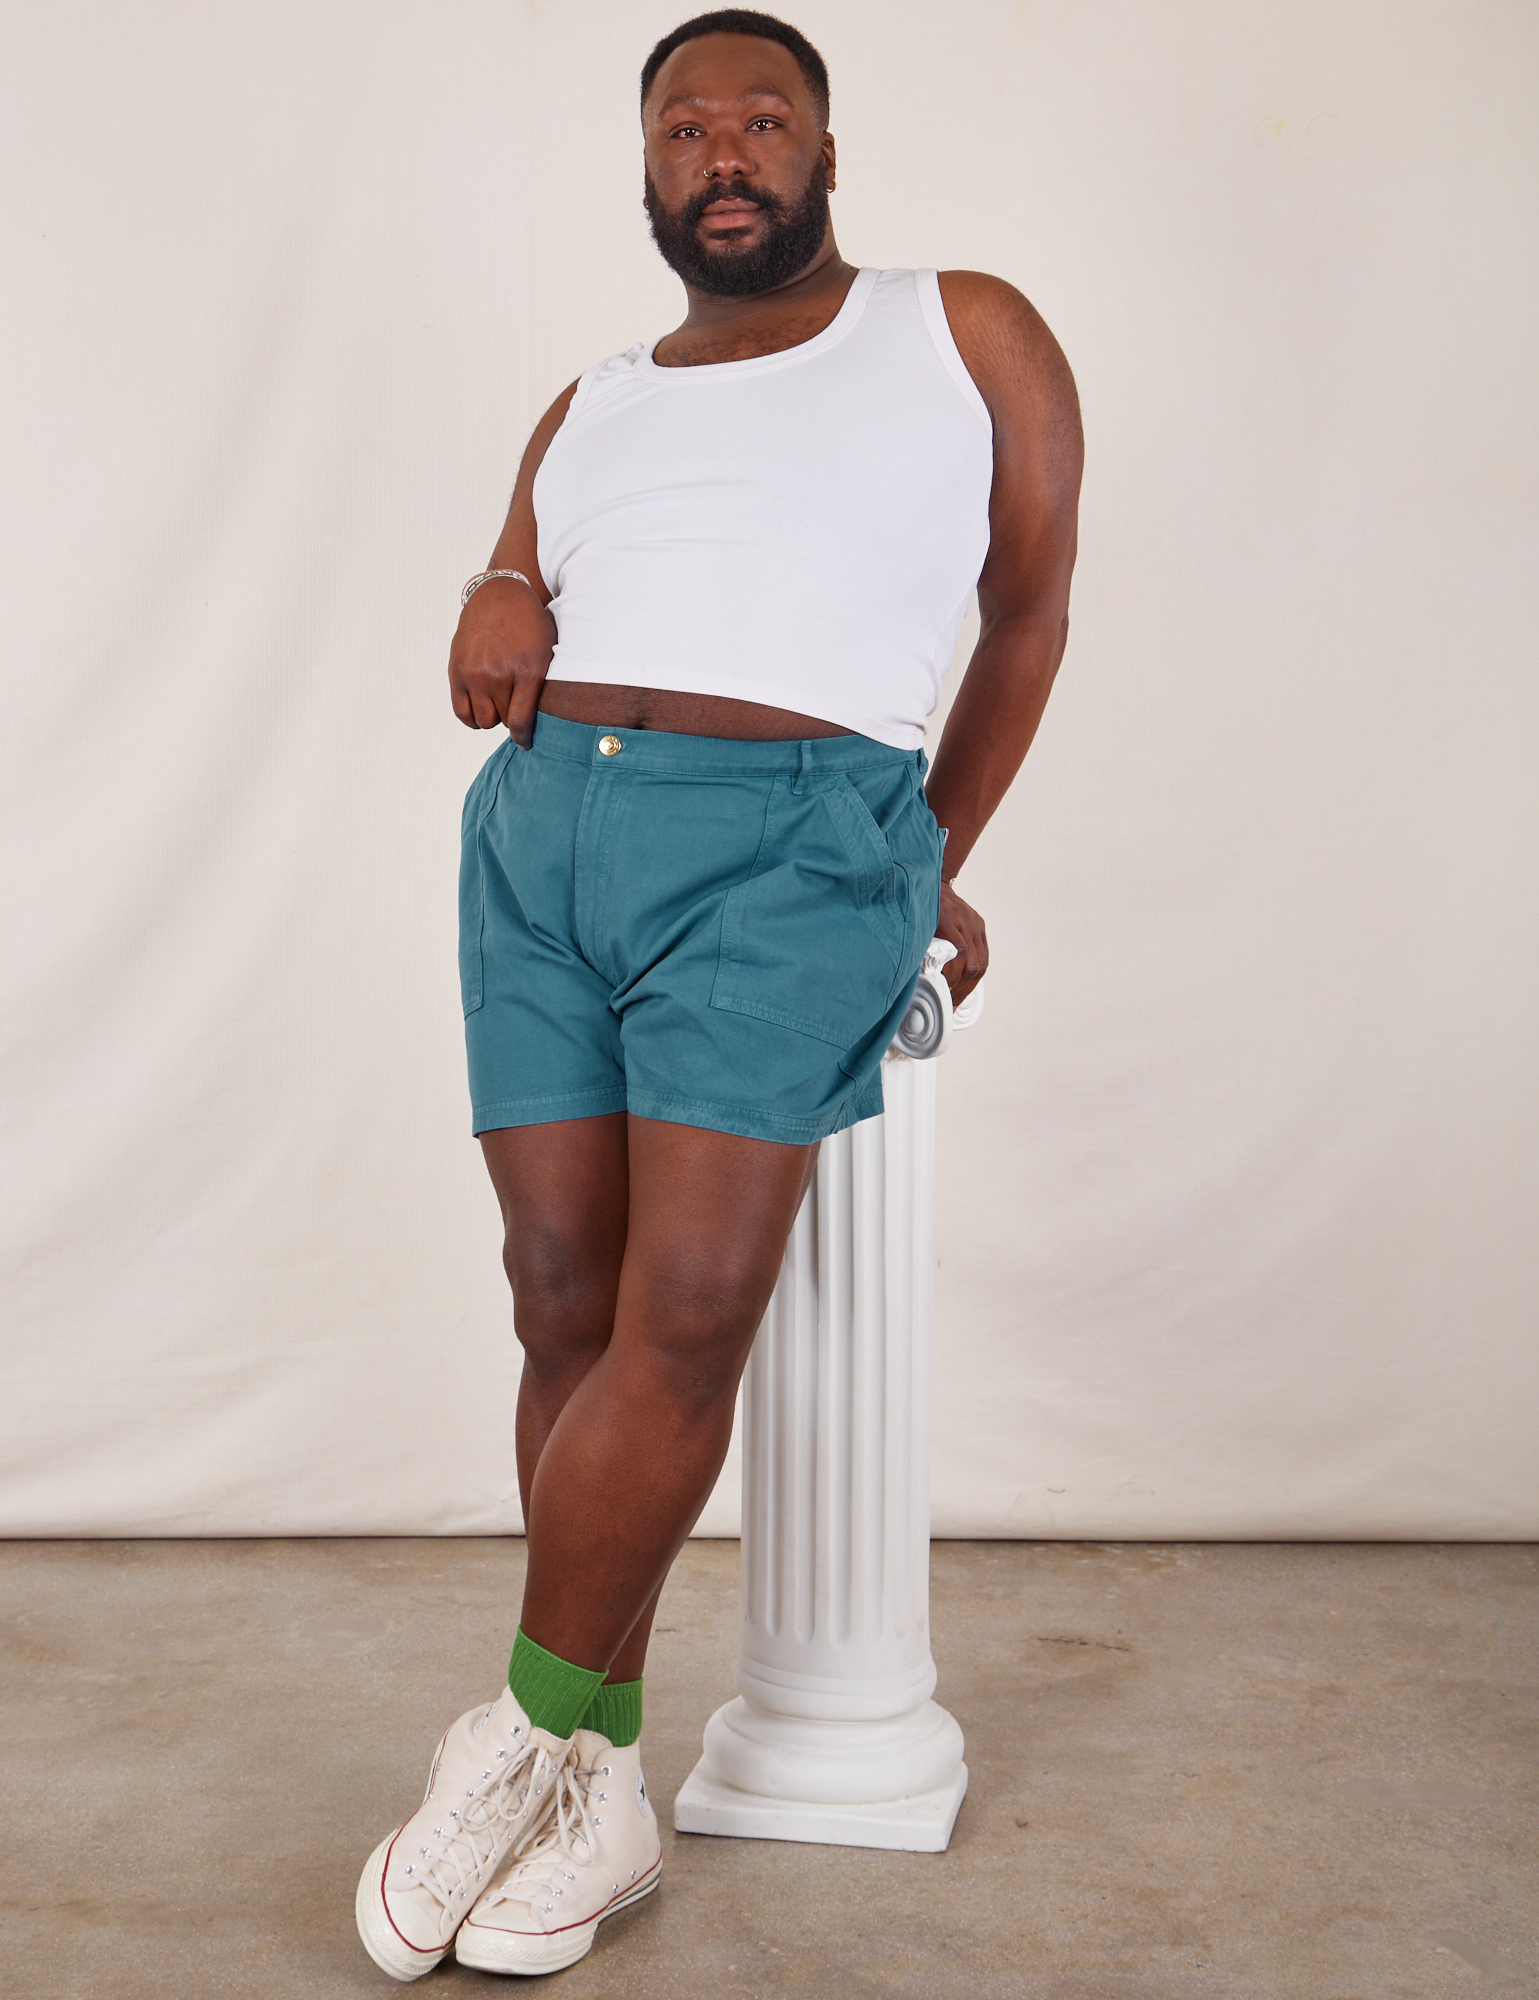 Elijah is wearing Classic Work Shorts in Marine Blue and Tank Top in vintage tee off-white